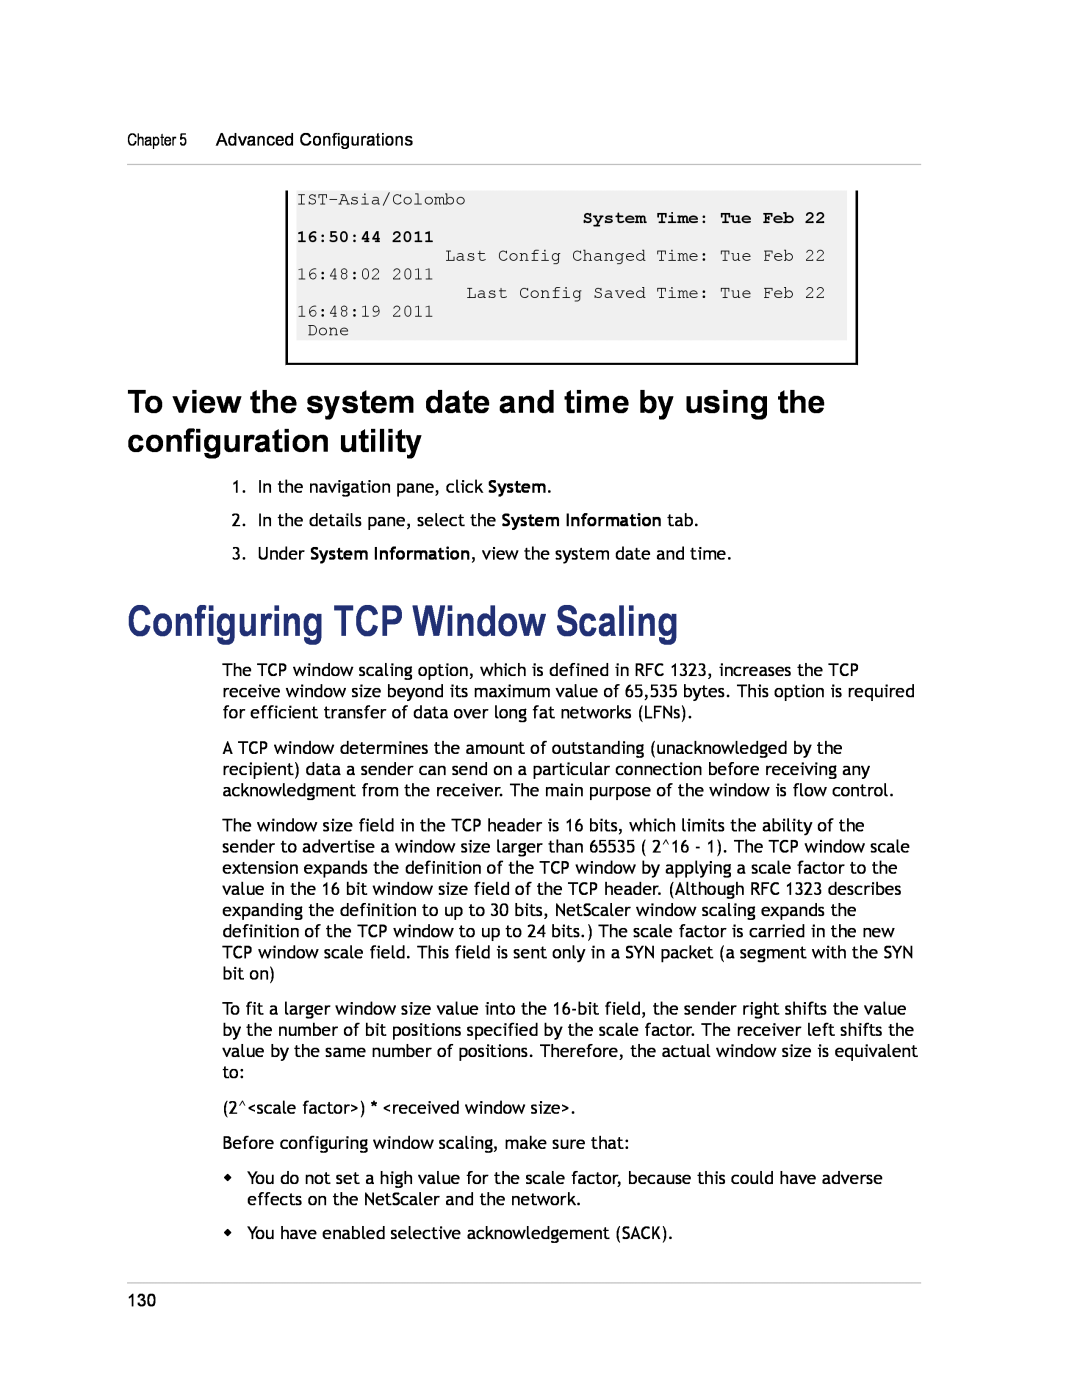 Citrix Systems CITRIX NETSCALER 9.3 manual Configuring TCP Window Scaling, System Time Tue Feb 165044 